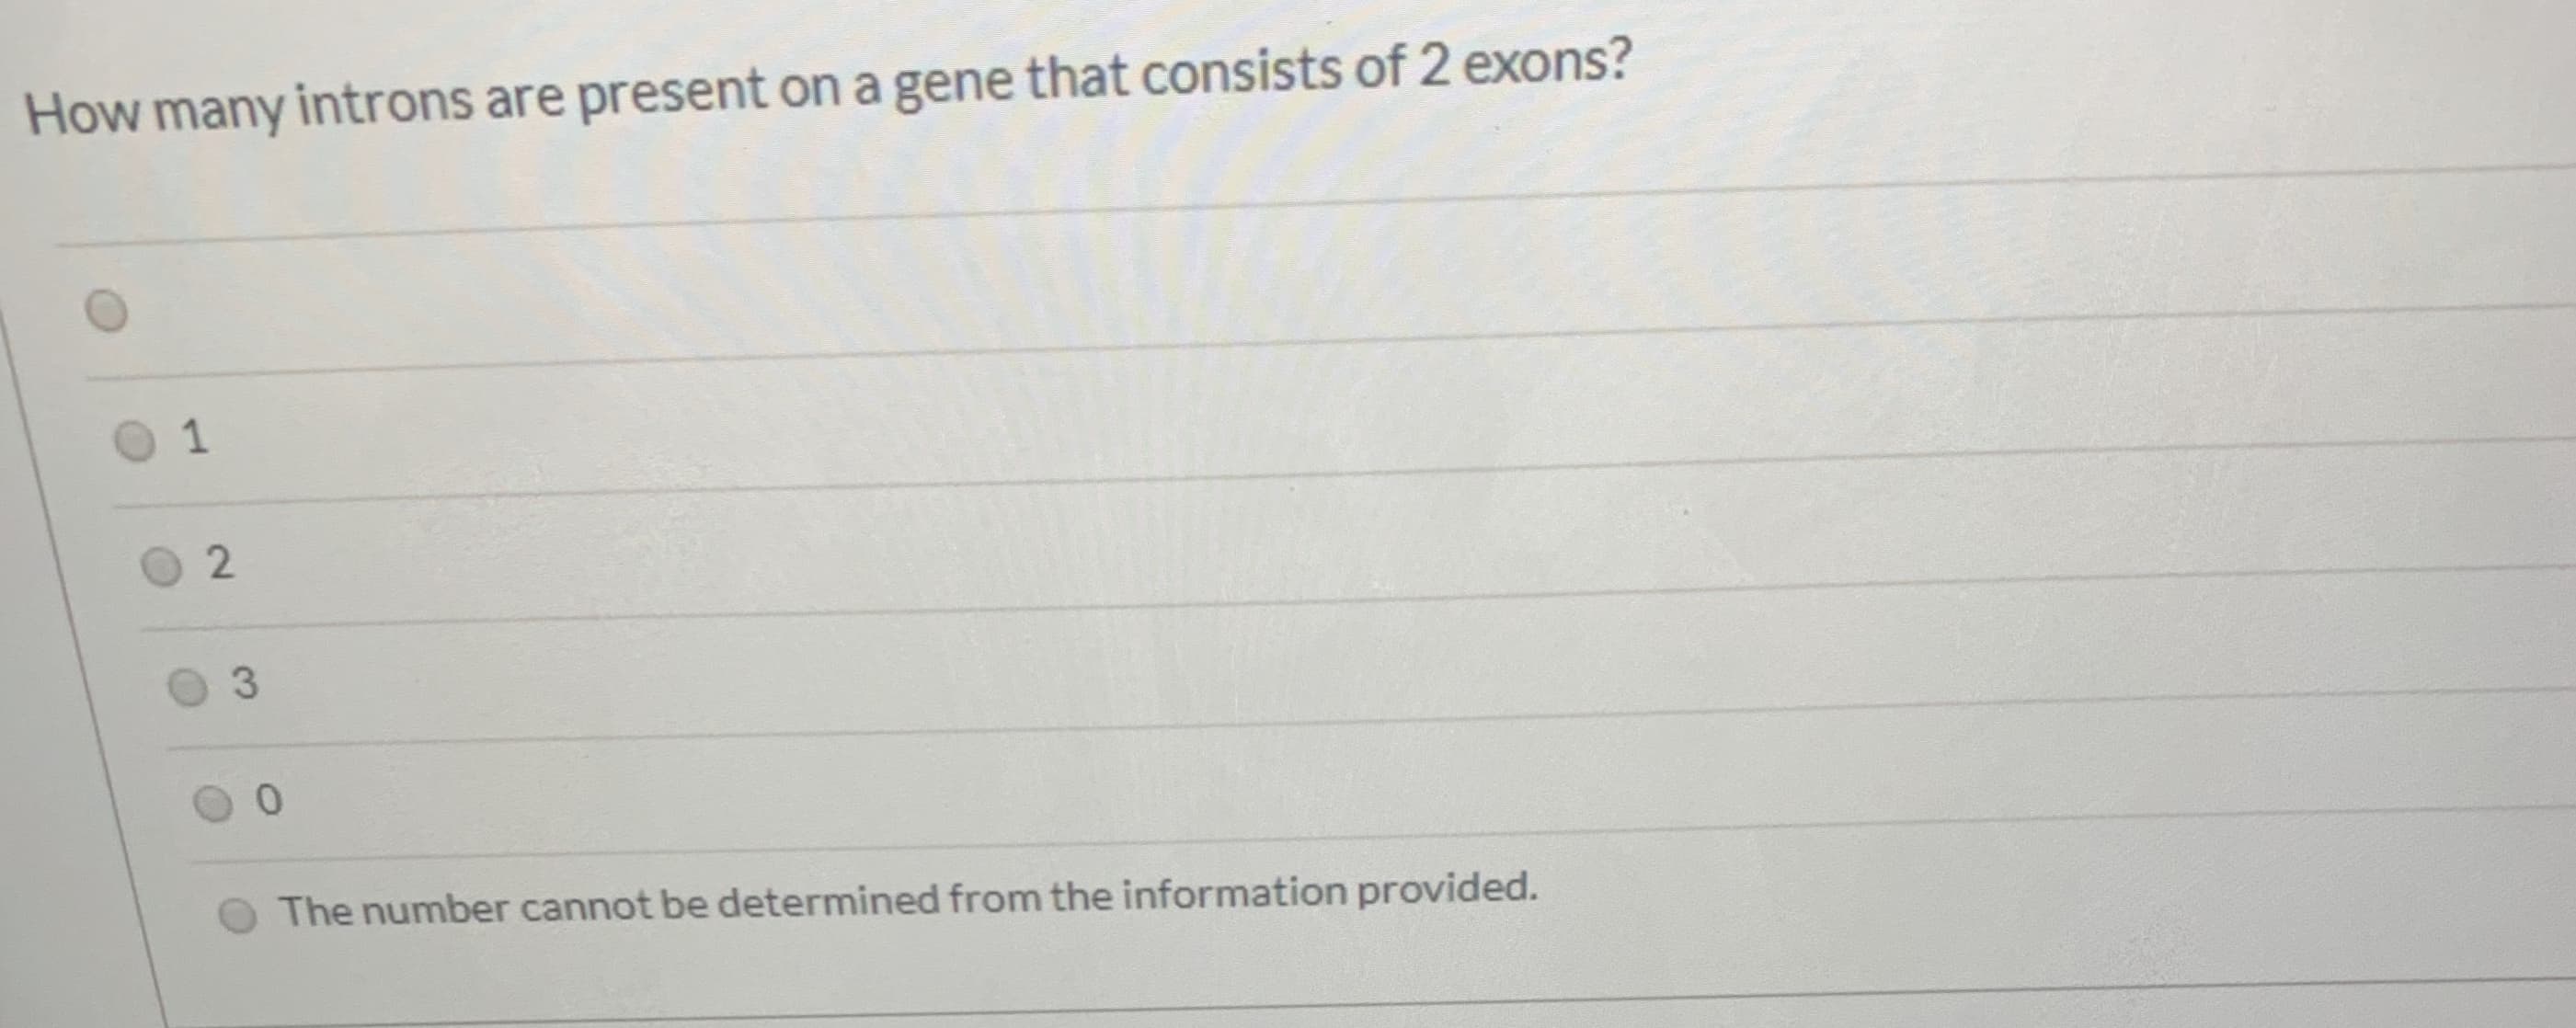 ### Question:
How many introns are present on a gene that consists of 2 exons?

### Answer Options:
- 1
- 2
- 3
- 0
- The number cannot be determined from the information provided.

### Explanation:
The question is asking about the number of introns in a gene that has 2 exons. 

#### Clarification:
In eukaryotic genes, an **exon** is a segment of a DNA or RNA molecule containing information coding for a protein or peptide sequence. An **intron** is a segment of a DNA or RNA molecule that does not code for proteins and interrupts the sequence of genes.

For a gene with 2 exons, typically each exon is separated by one intron. Therefore, if there are 2 exons, you will have 1 intron separating them.

### Correct Answer:
- 1